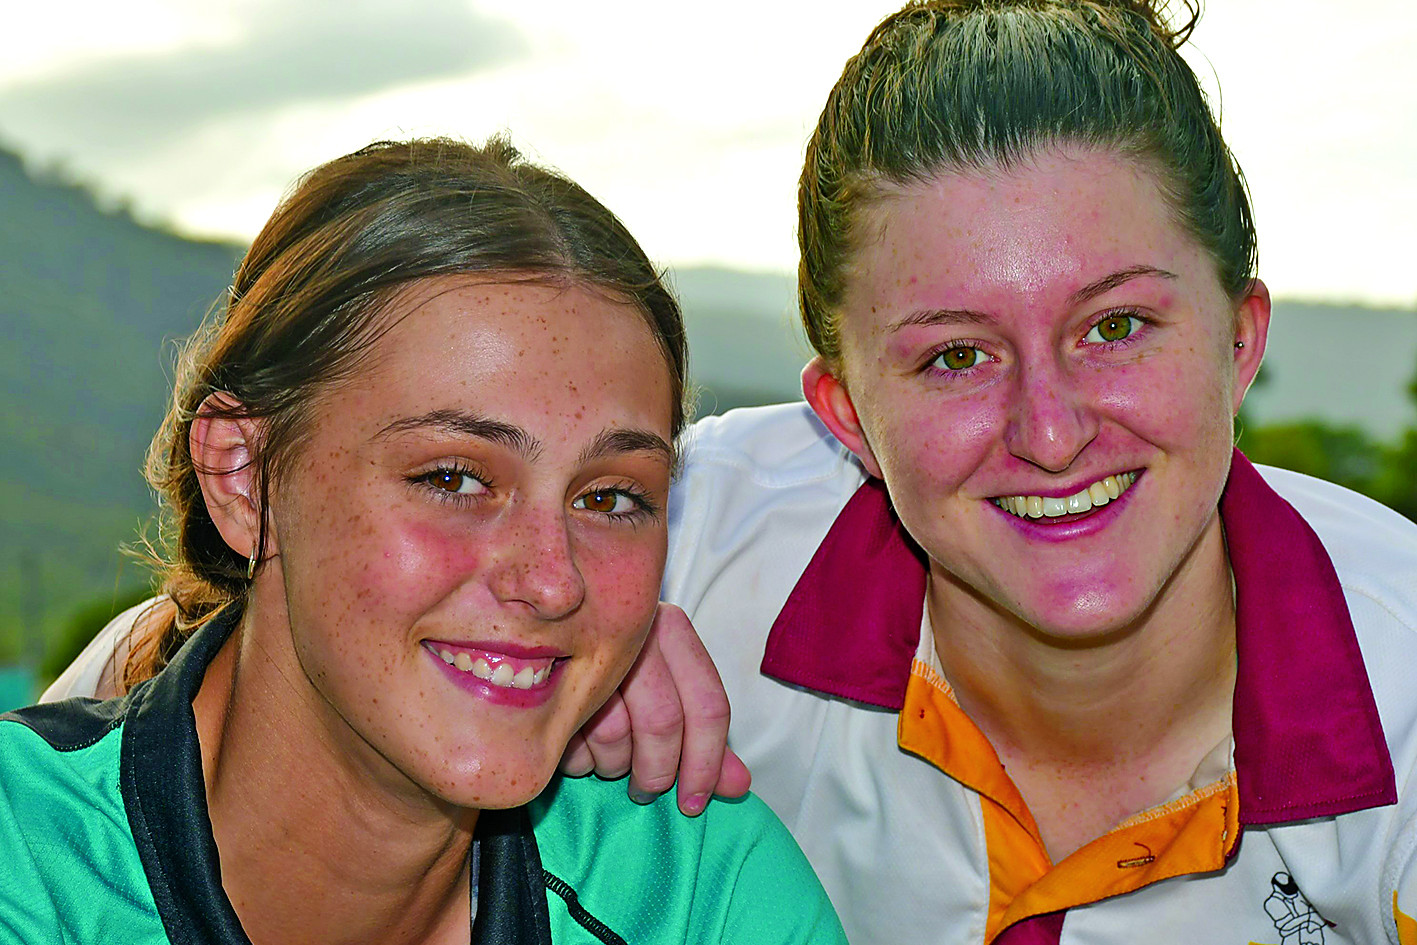 Atherton cricketers Amy Hunter and Abby Toshack have been cutting a path through Queensland cricket with both the girls being selected and playing in high end representative teams and competitions.